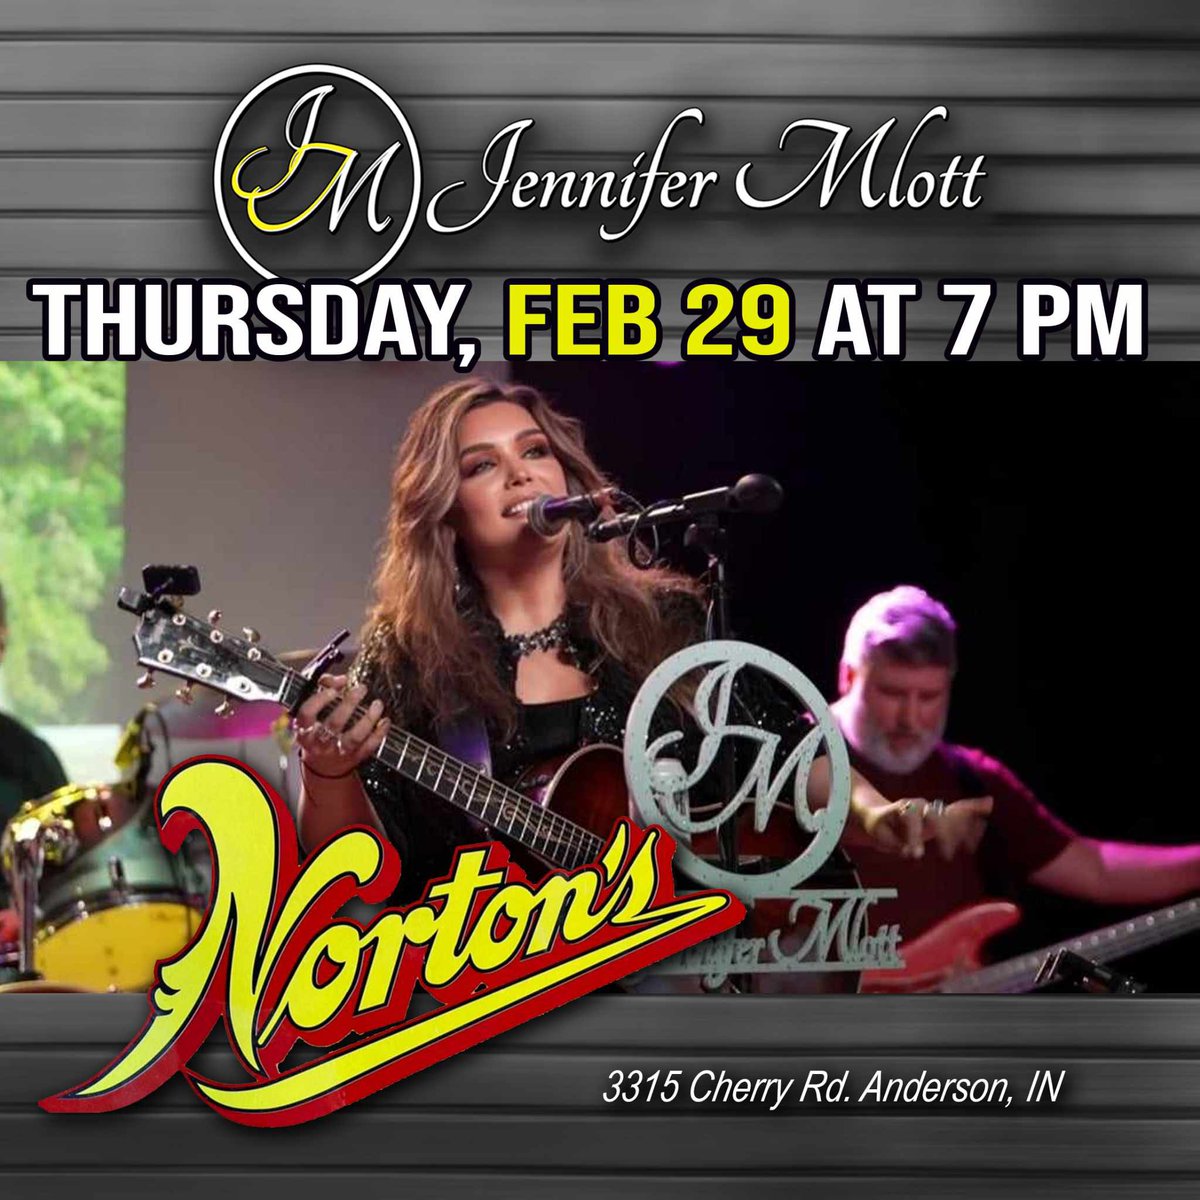 It’s time for another fun night at T.M. Nortons Join me this Thursday for a great night of amazing food and music! I’ll be singing beginning at 7PM ! See you soon Anderson friends! #jennifermlottmusic